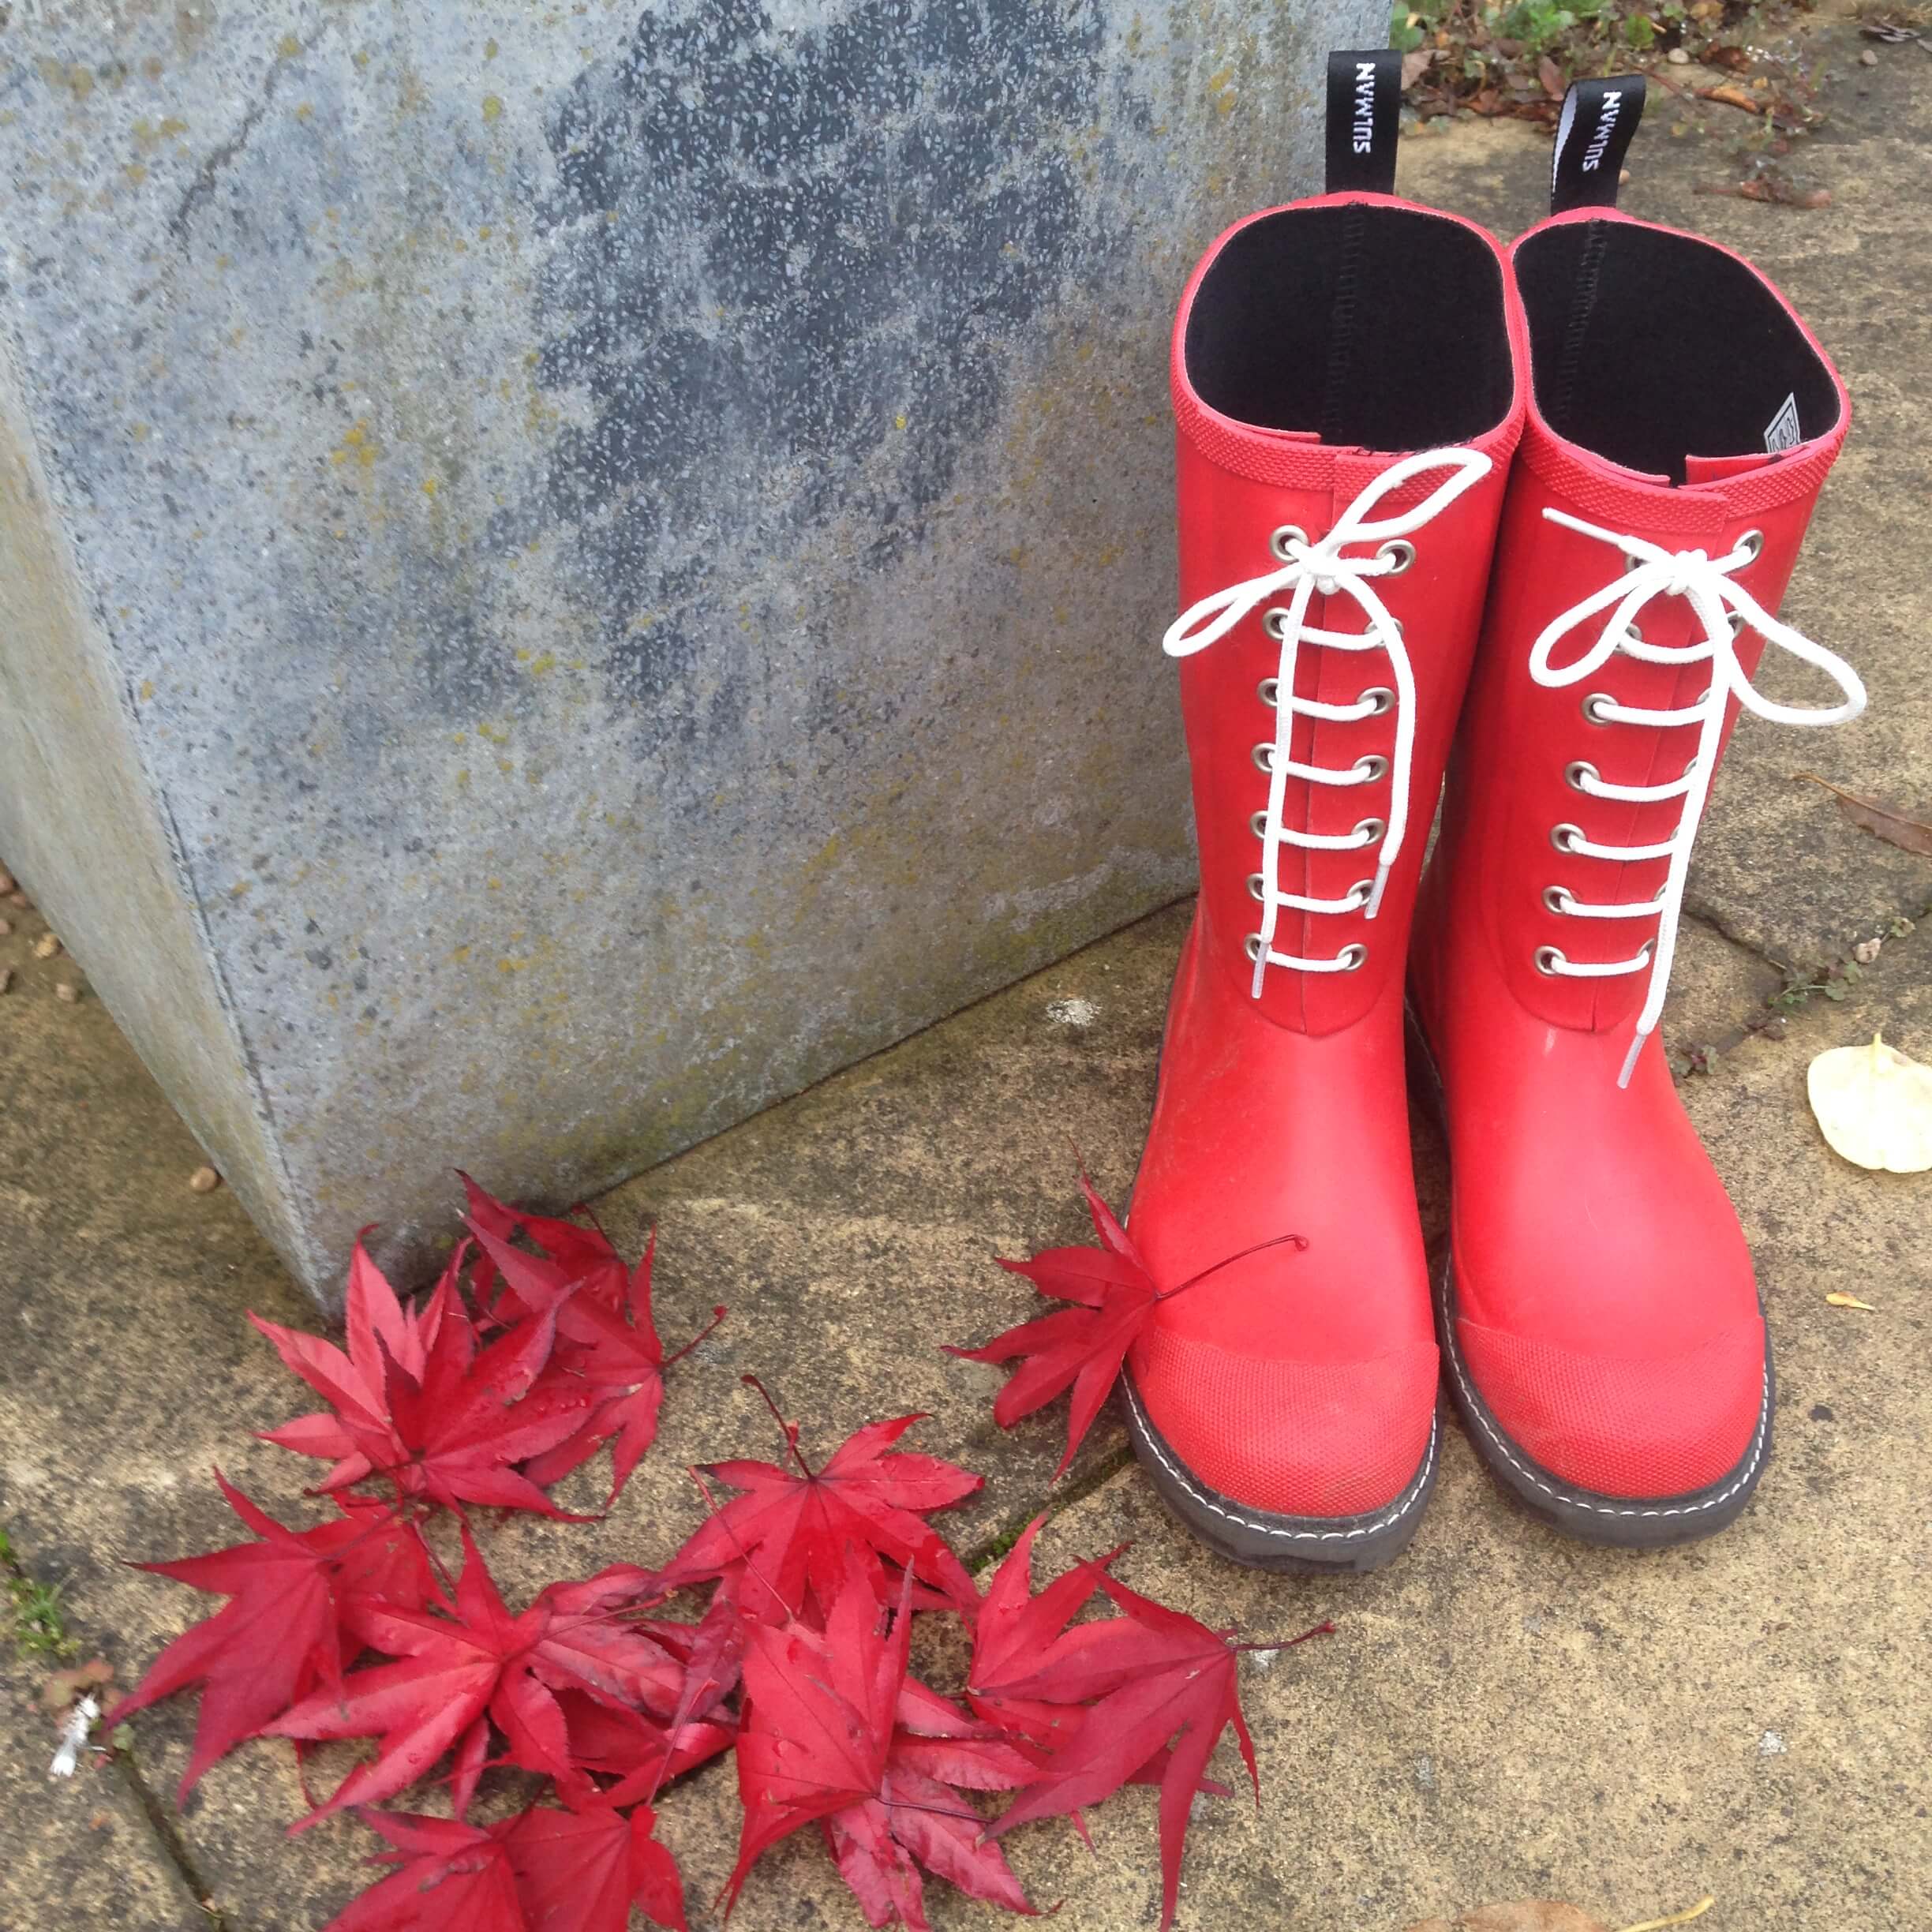 The Linnea Red Wellies with White Laces from Sulman - Bill and Edna